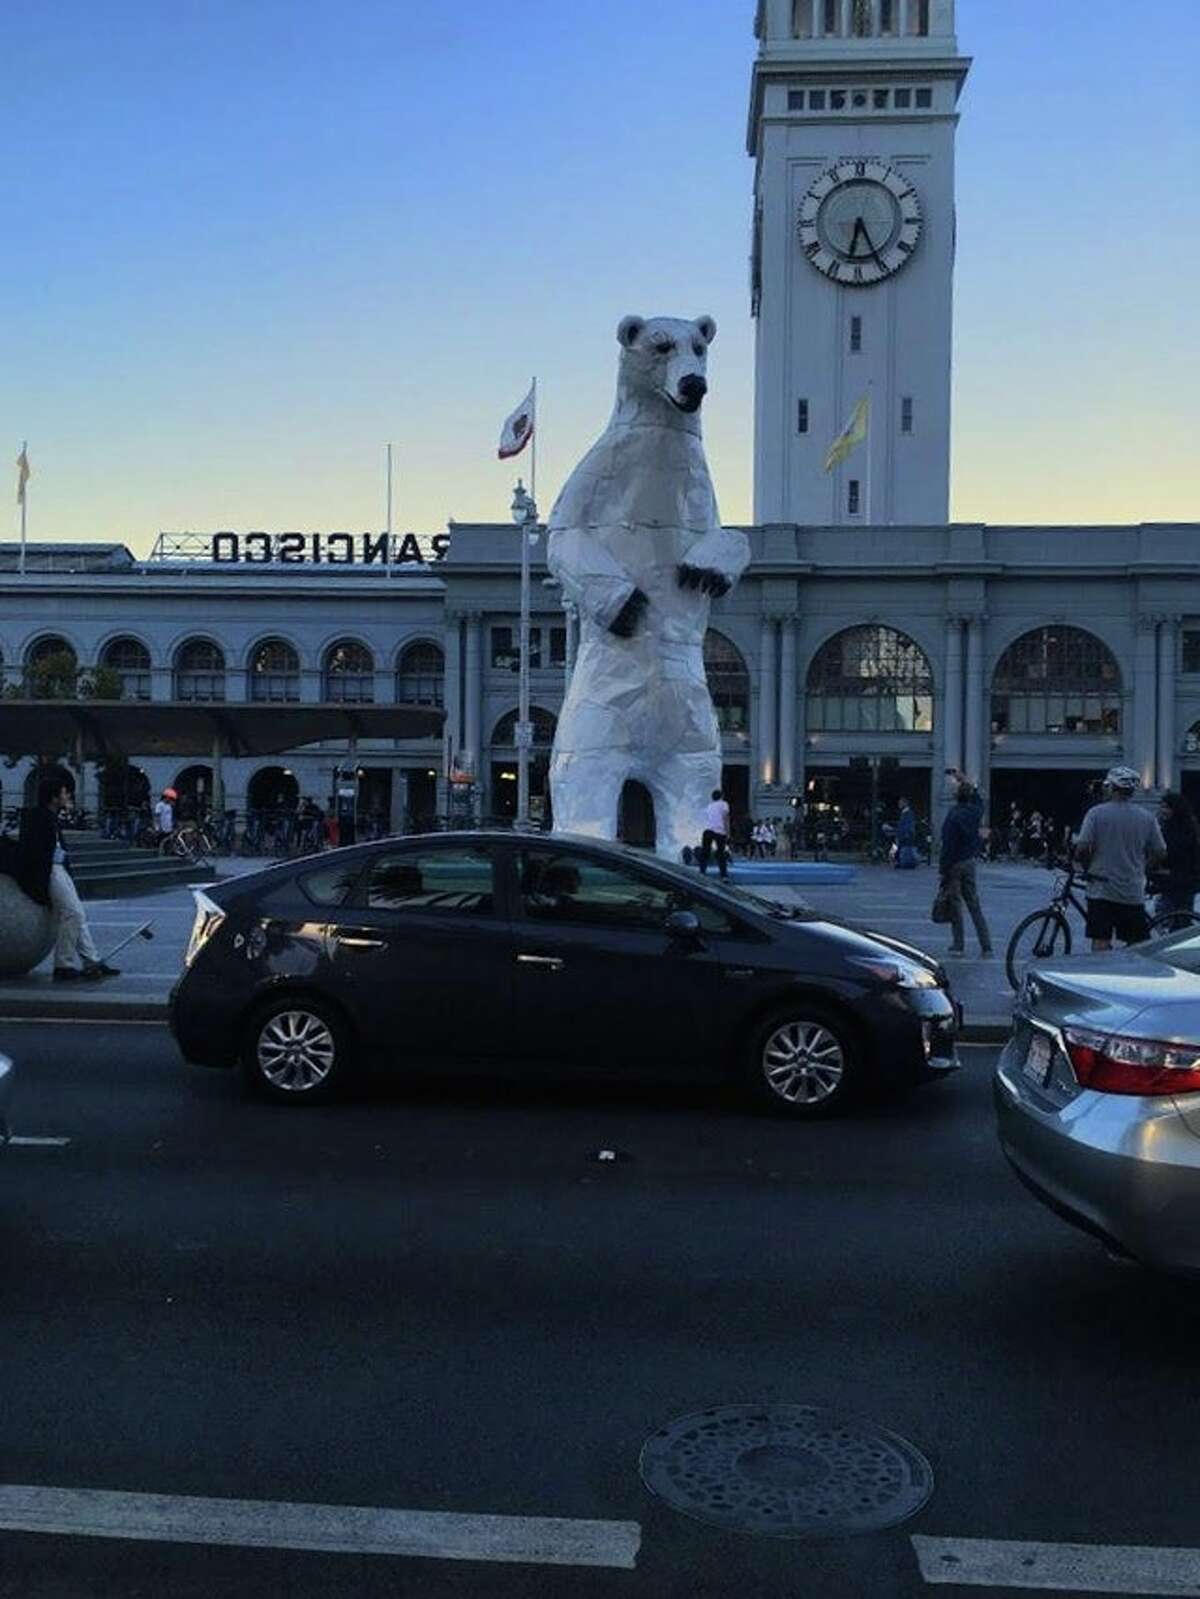 A 35-foot-tall polar bear sculpture made from car hoods looms tall in front of the San Francisco Ferry Building during the Global Climate Action Summit, September 2018.